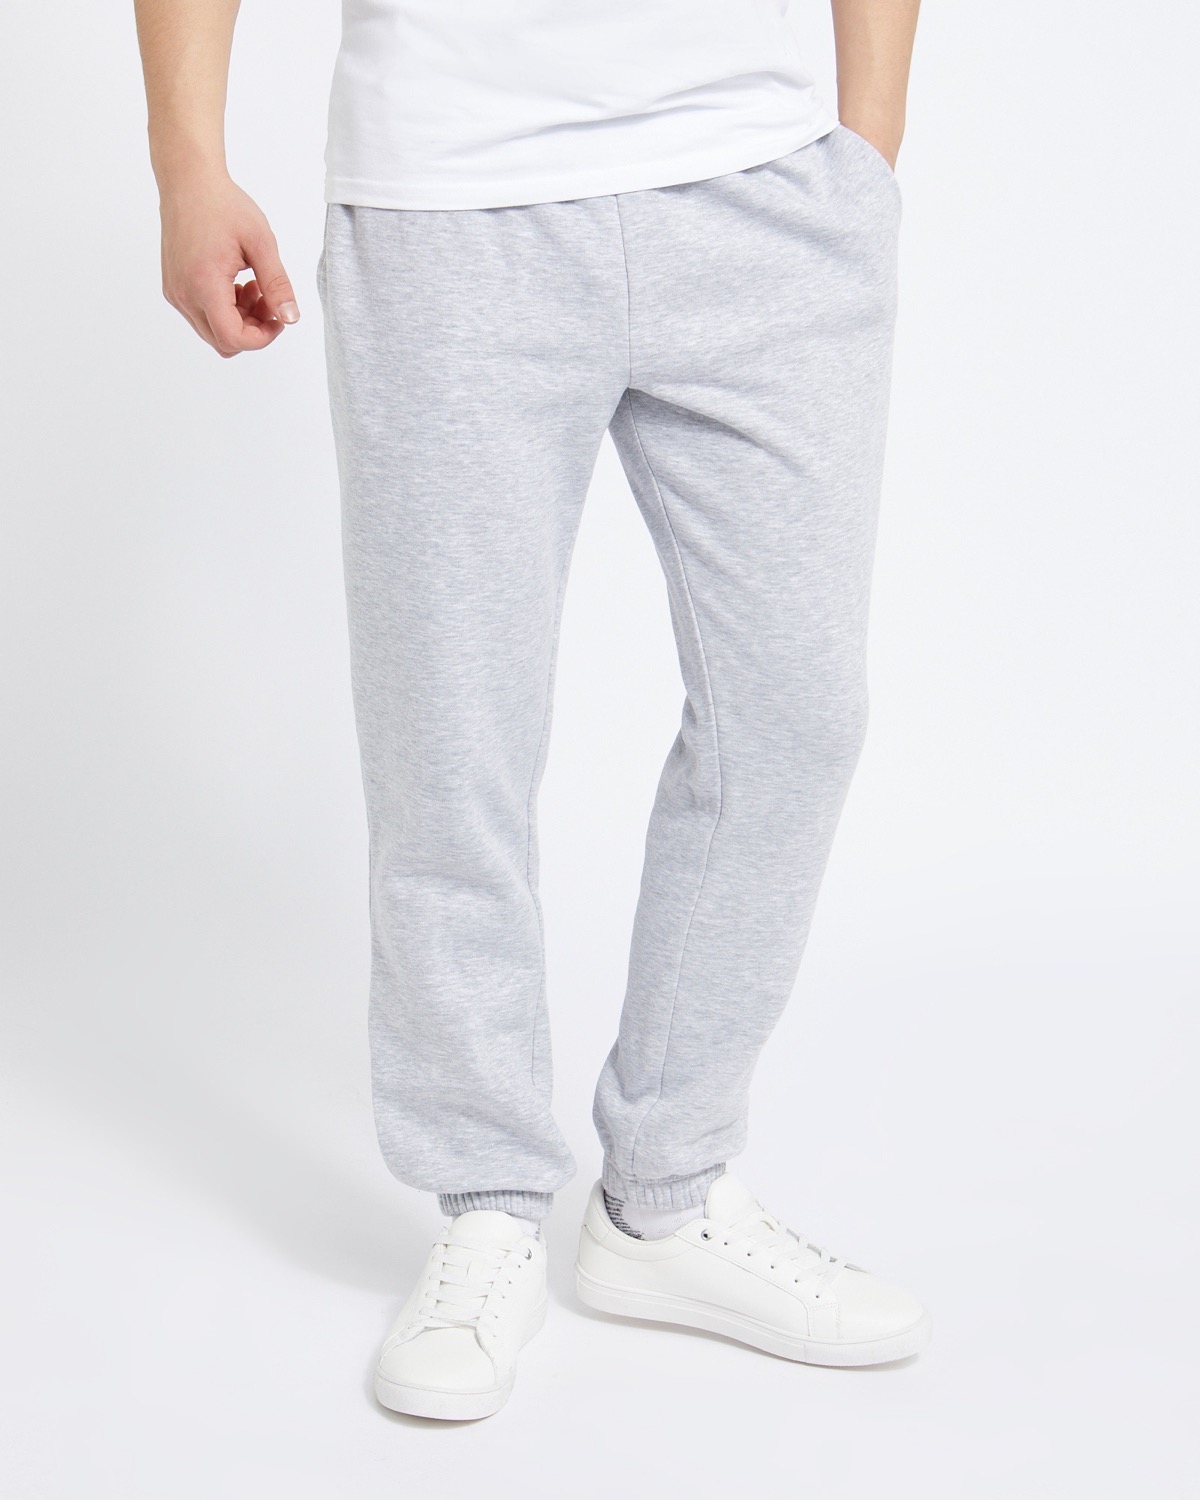 Buy Charcoal Grey Cuffed Joggers from the Next UK online shop